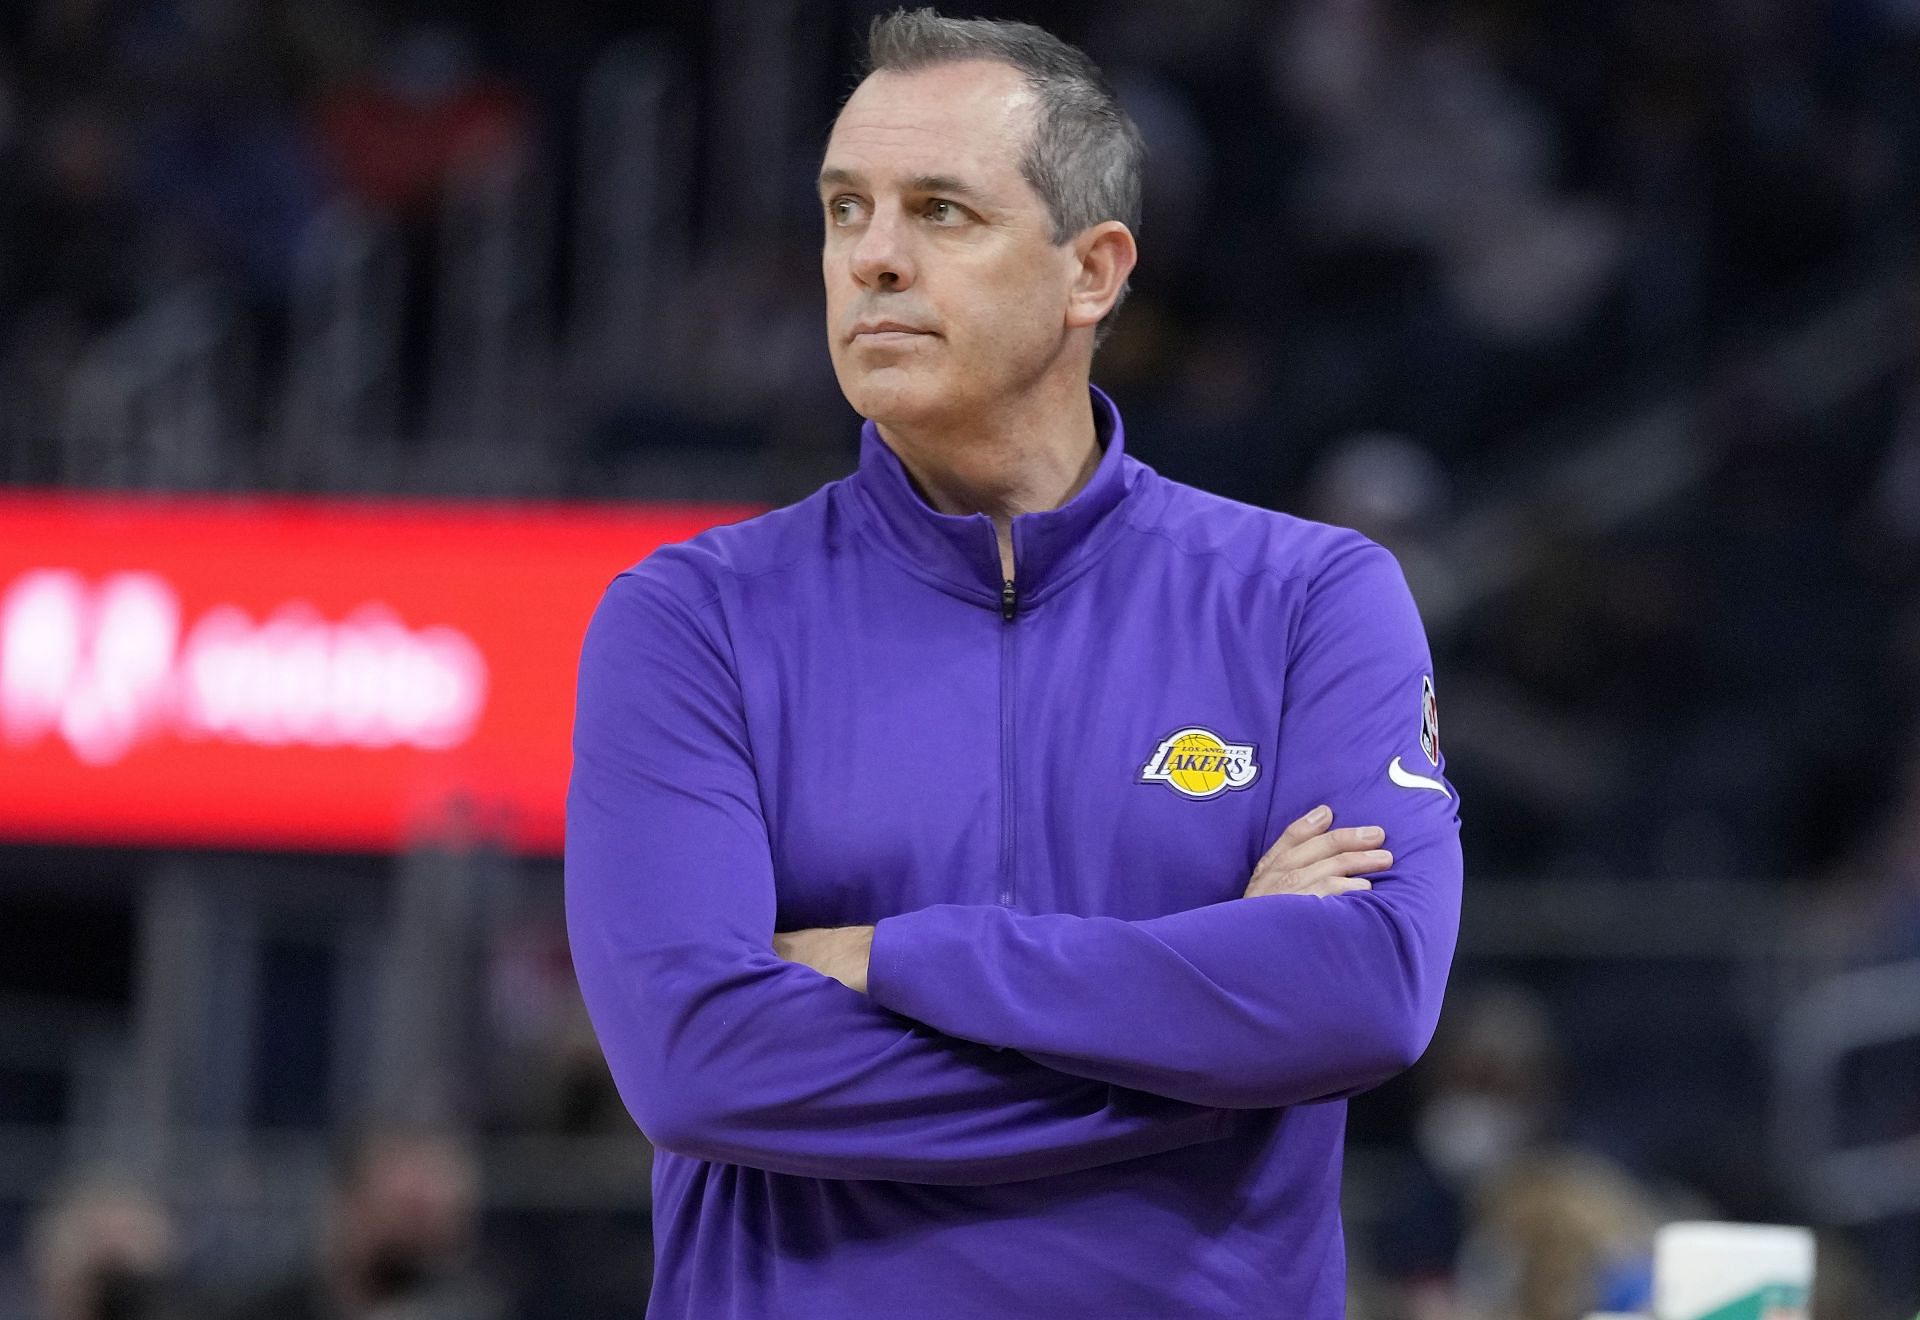 LA Lakers head coach Frank Vogel put a positive spin on the dust-up between Anthony Davis and Dwight Howard